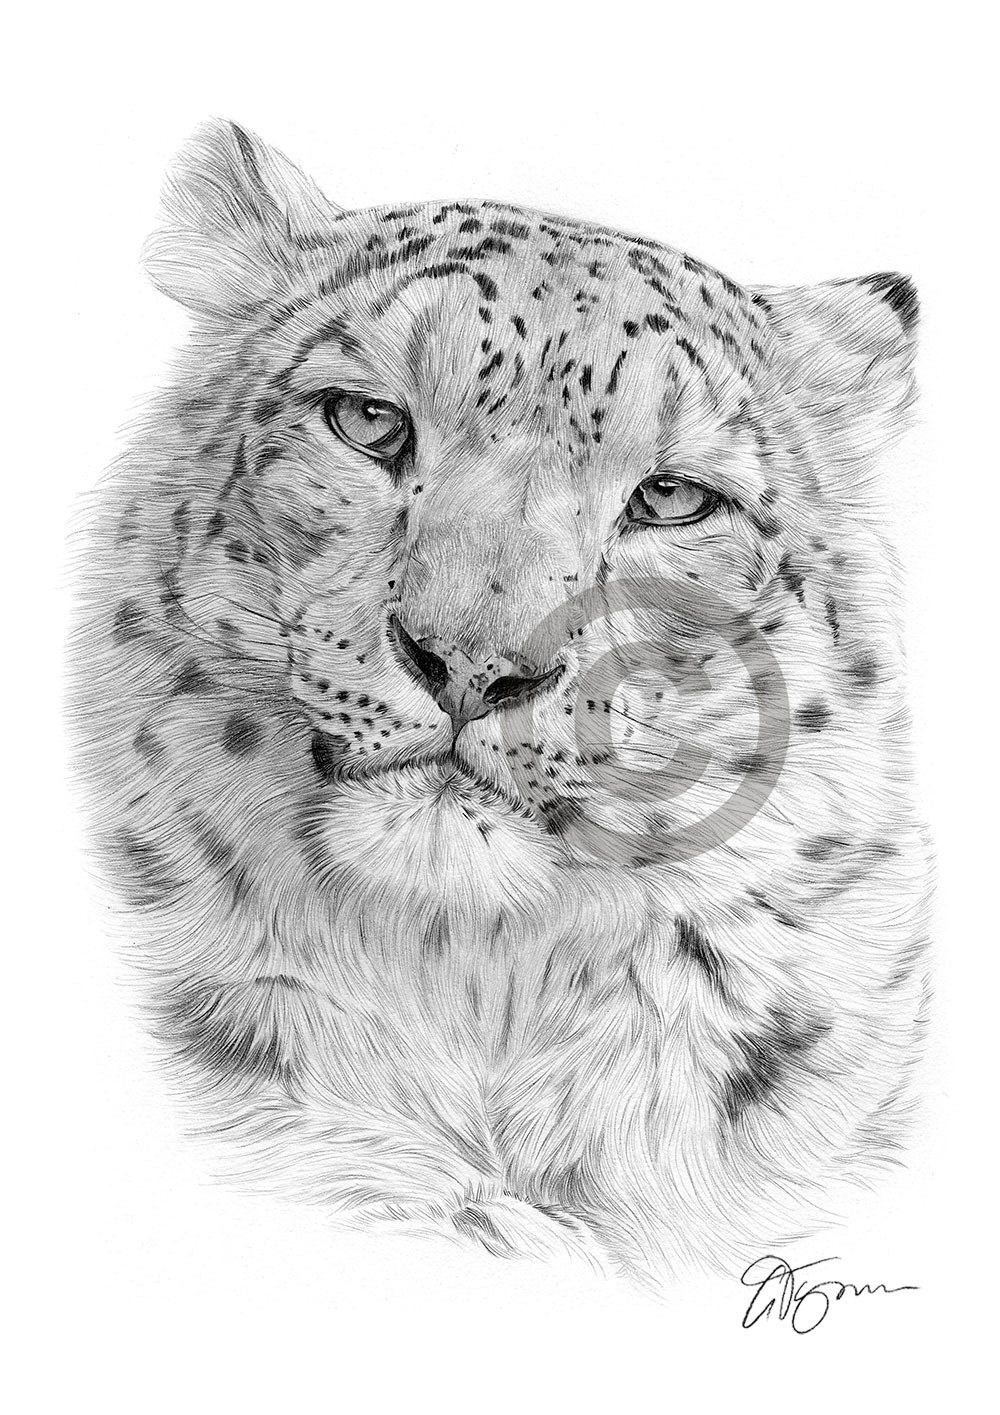 Pencil drawing of a snow leopard by artist Gary Tymon